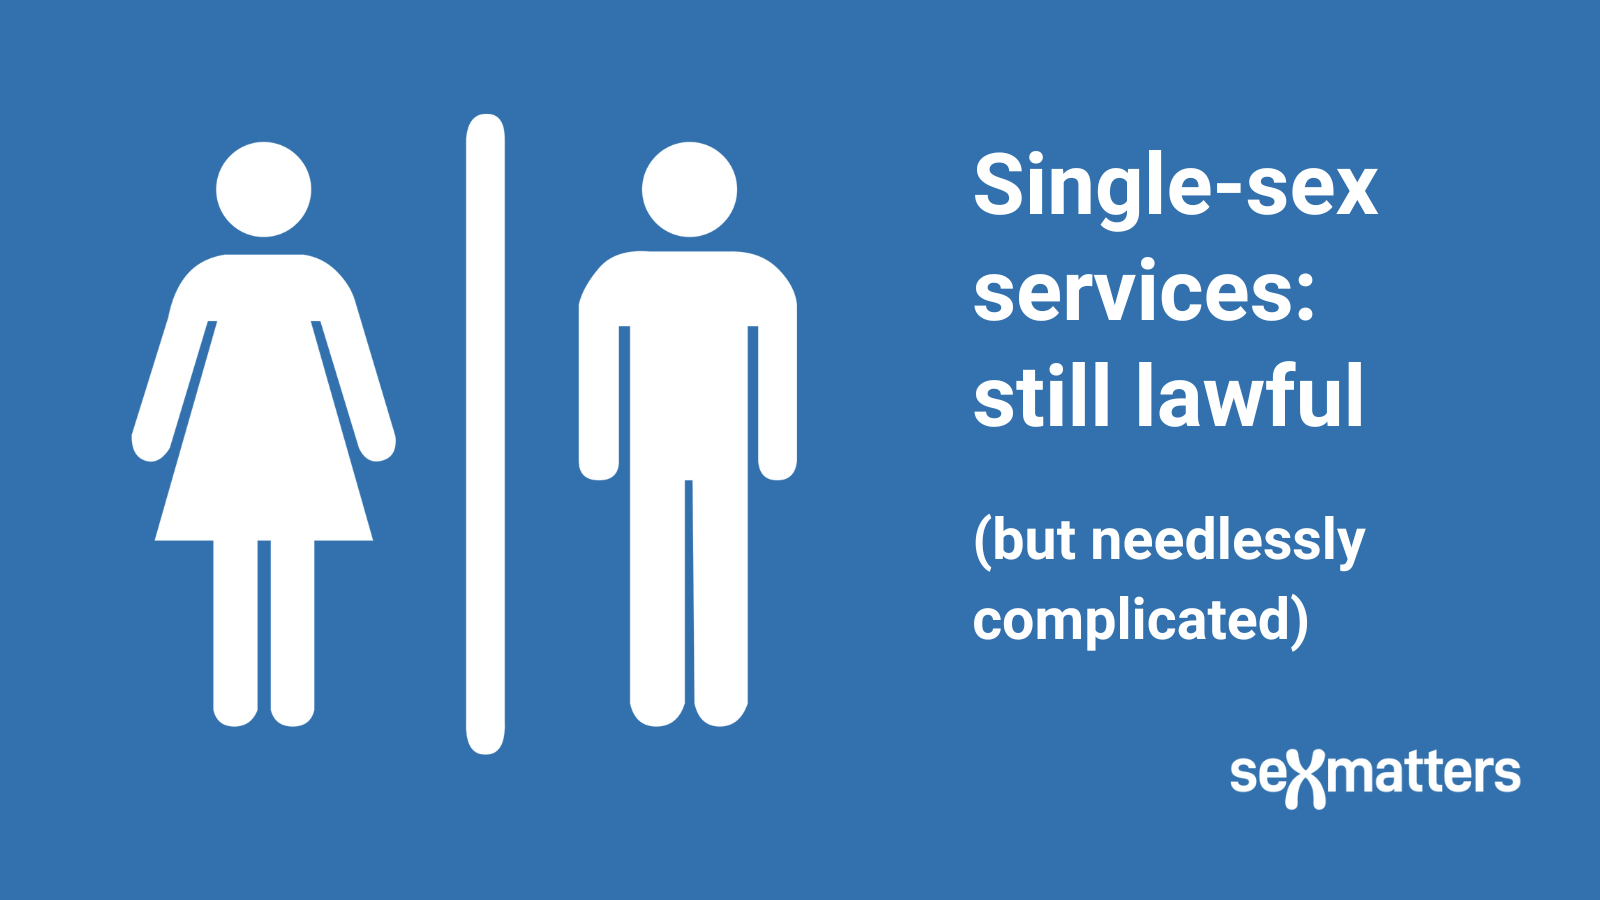 Single-sex services: still lawful (but needlessly complicated)